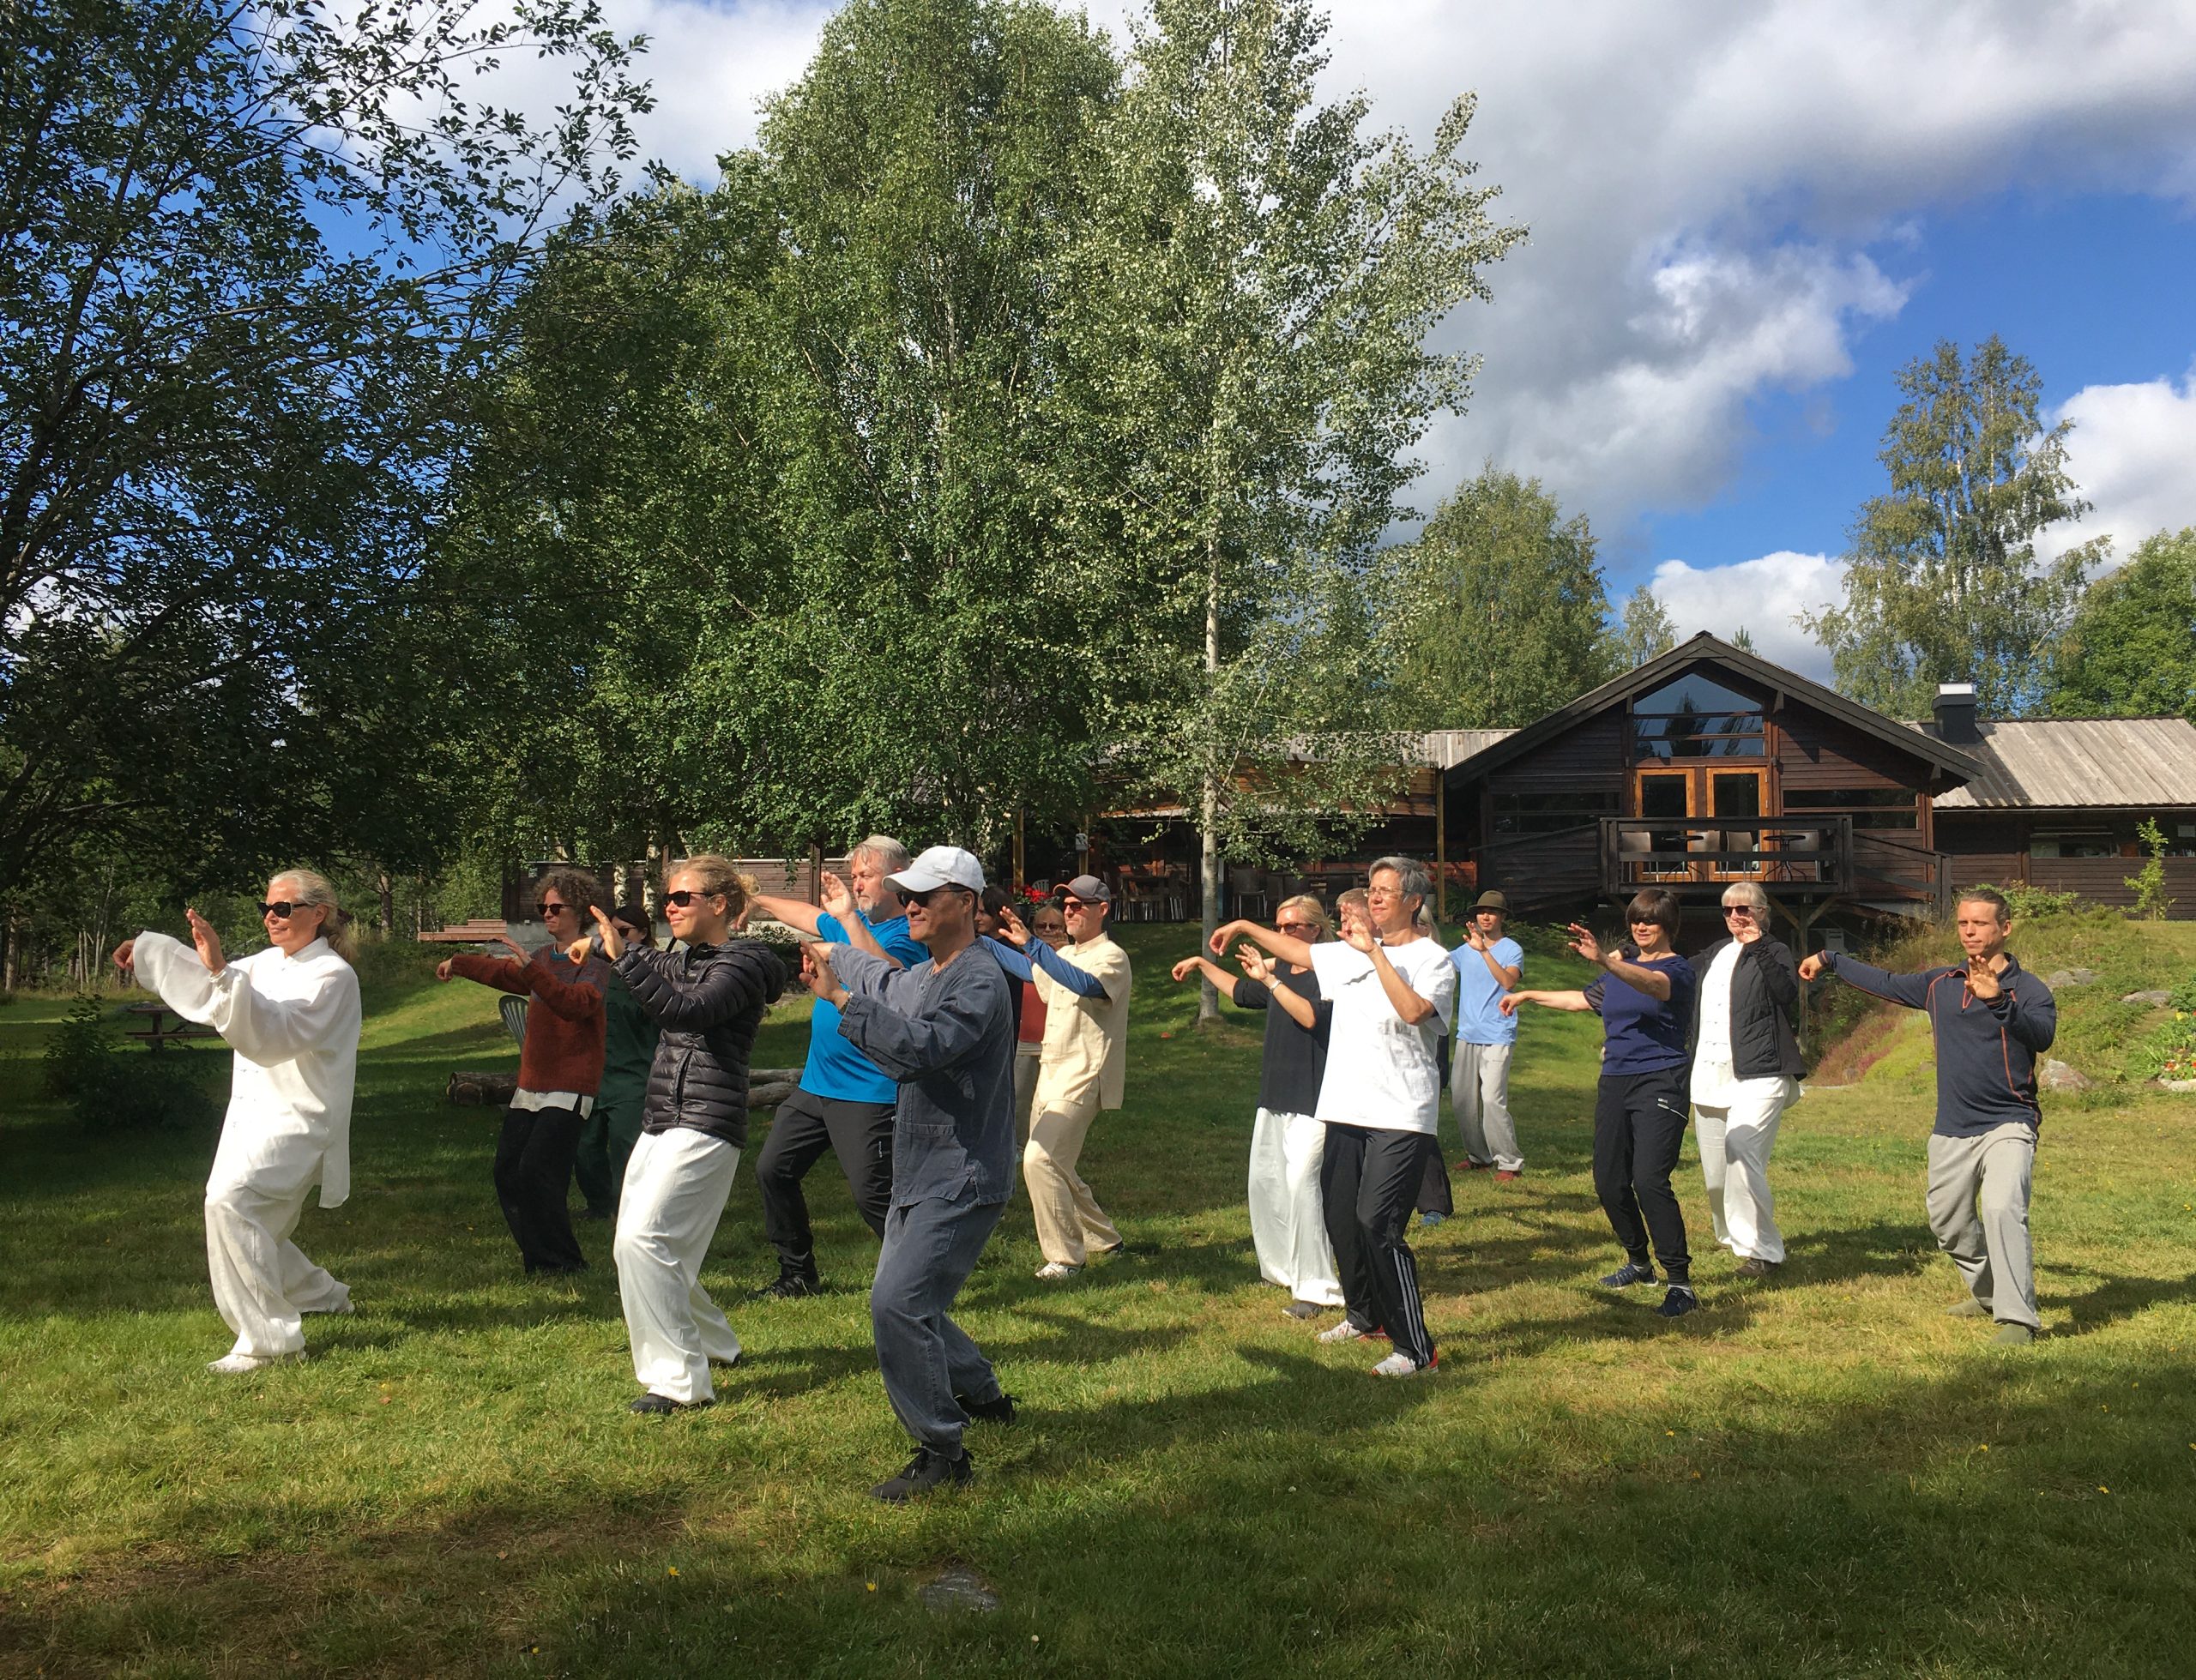 From earlier summer retreats at Dharma Mountain - Taiji Practise